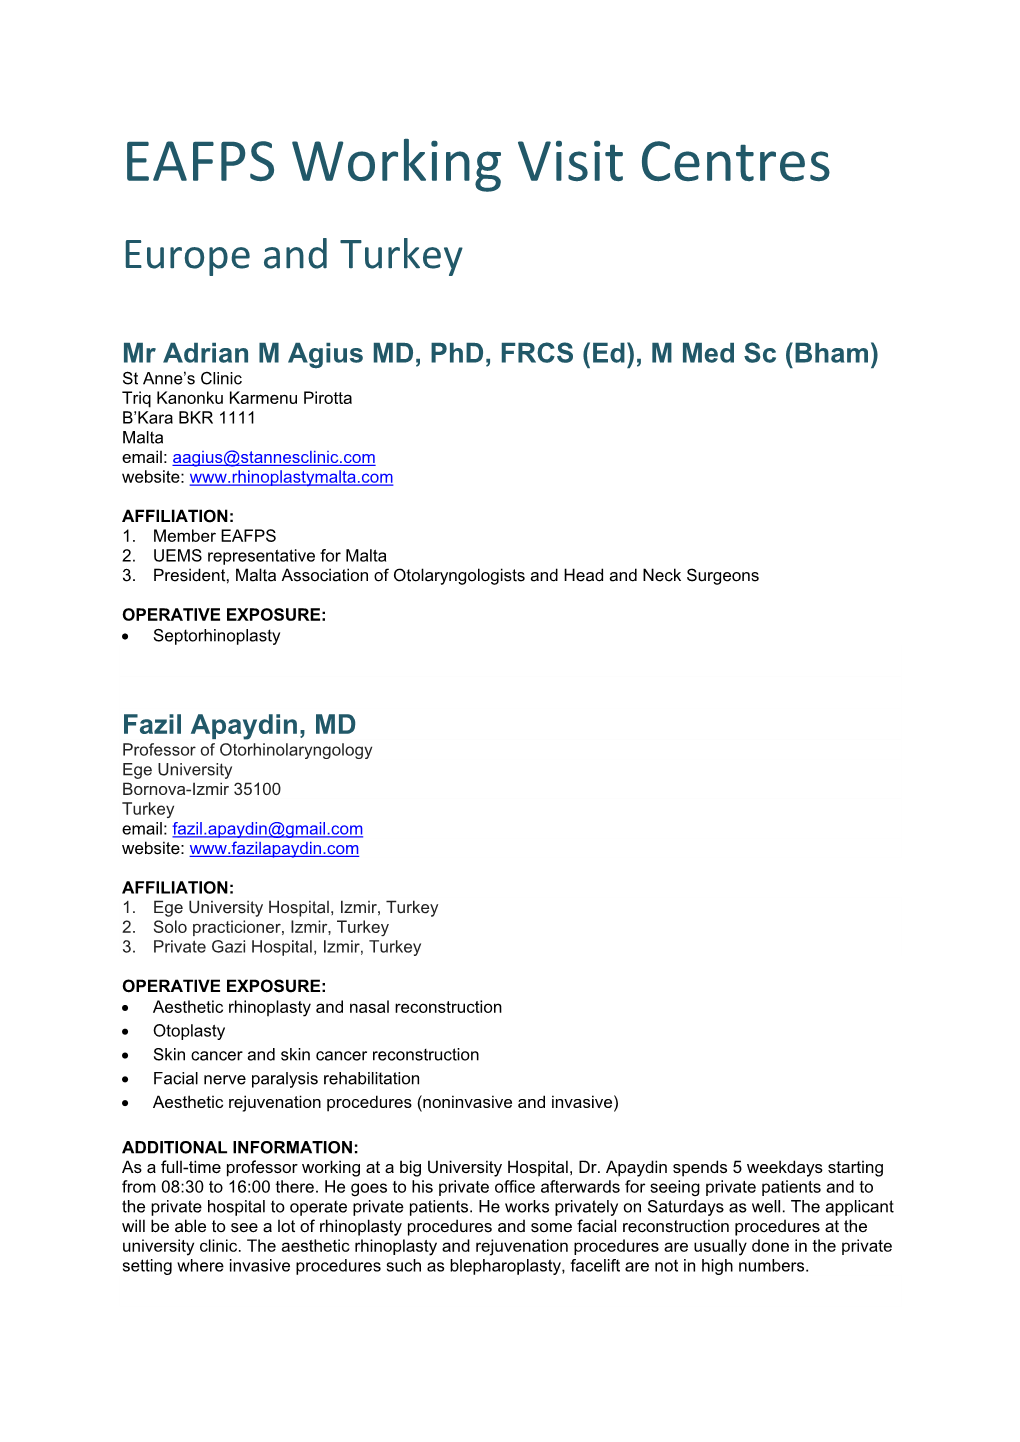 EAFPS Working Visit Centres Europe and Turkey